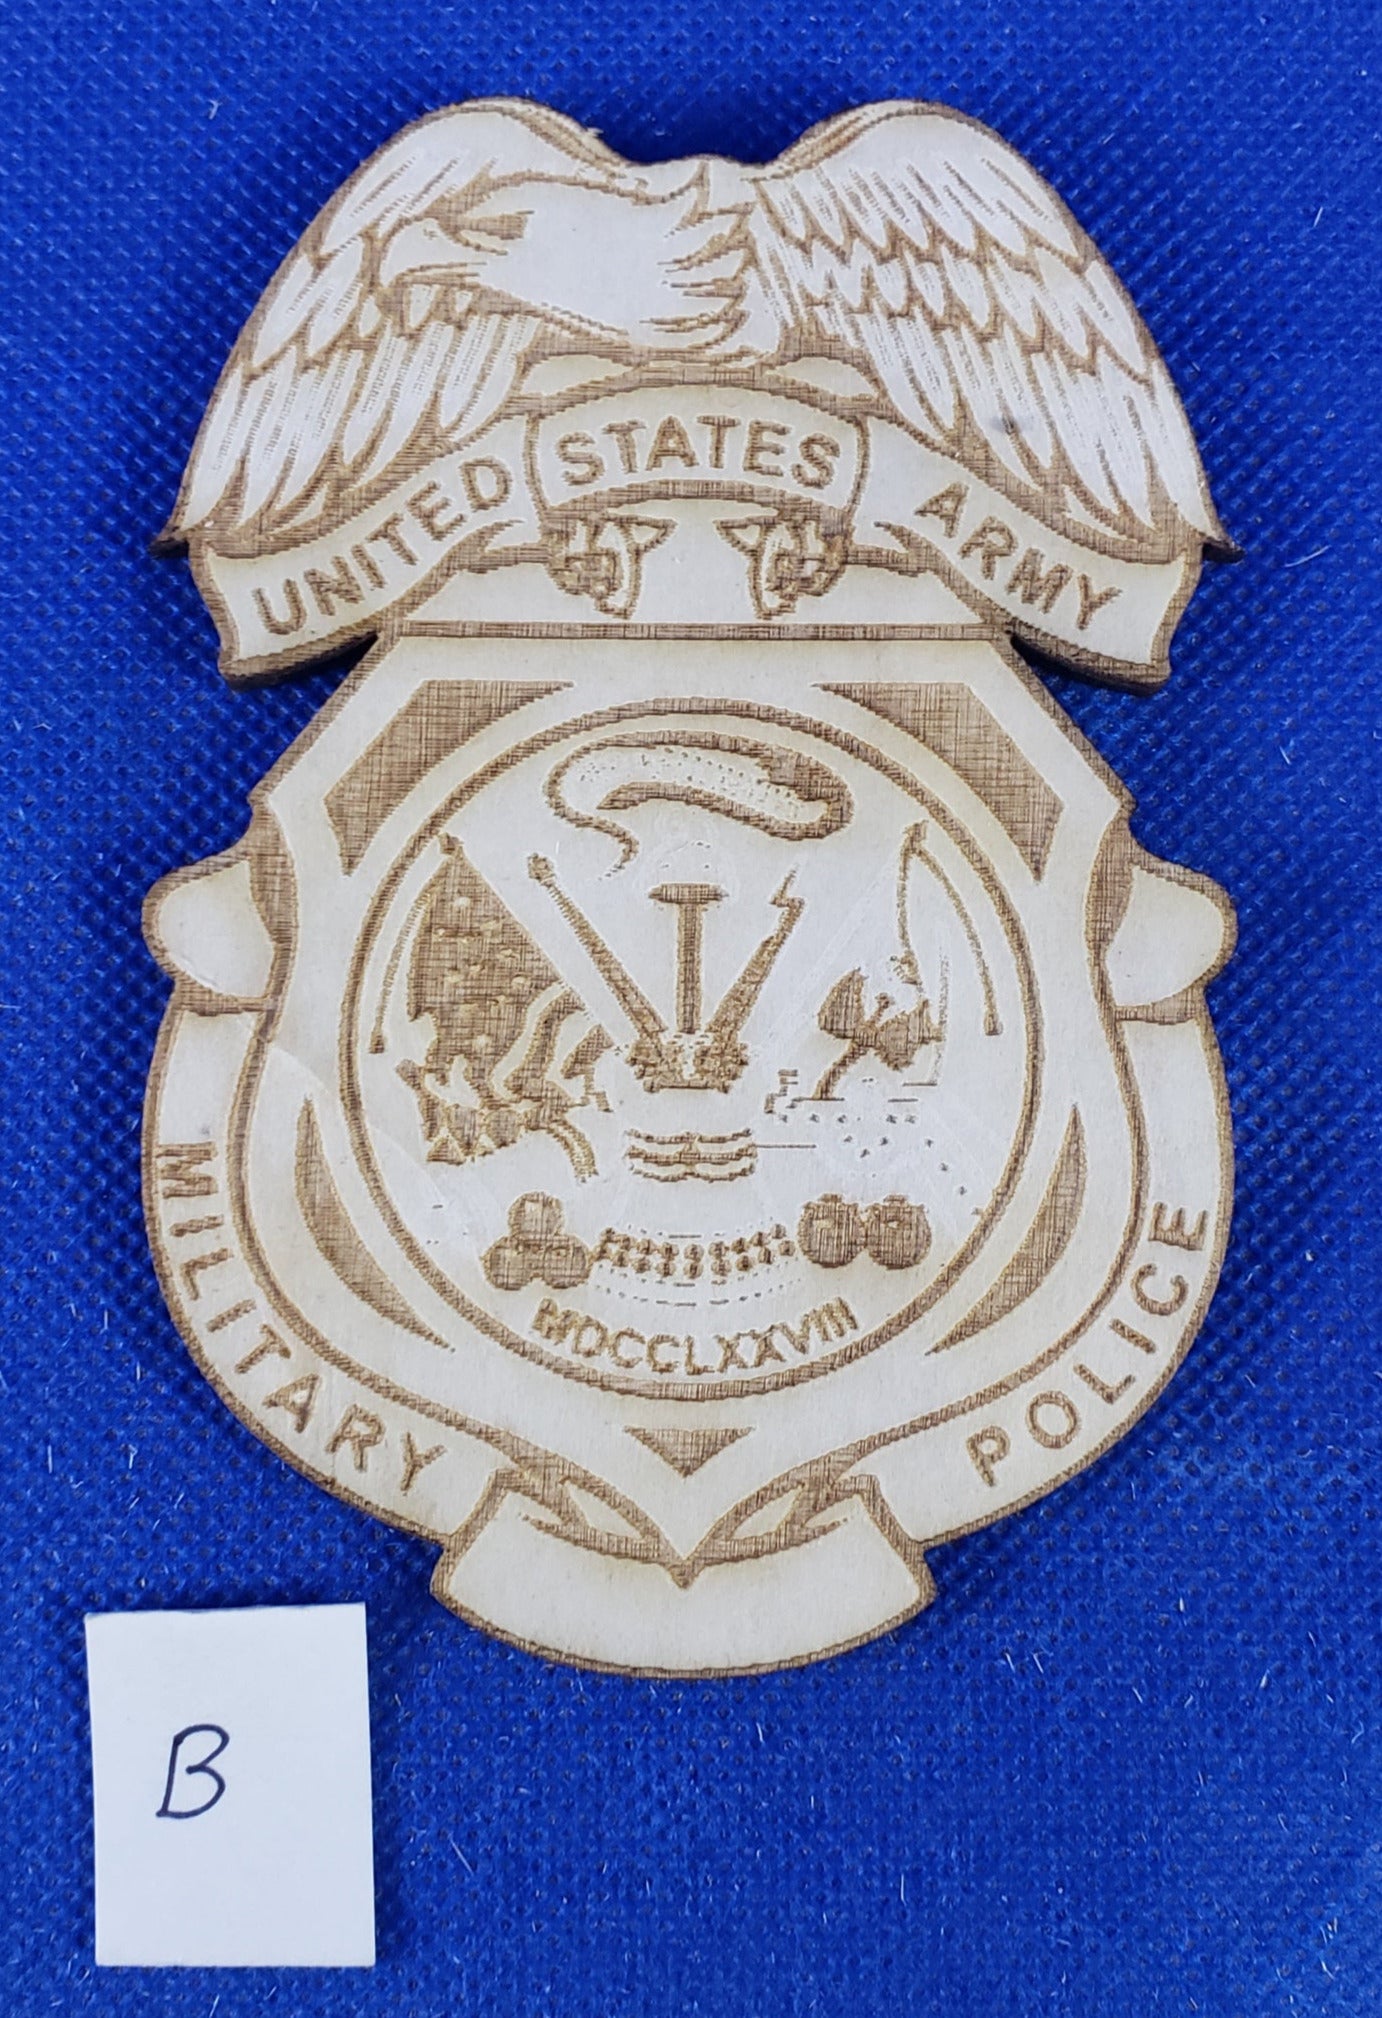 US Army Military Police - Laser cut natural wooden blanks